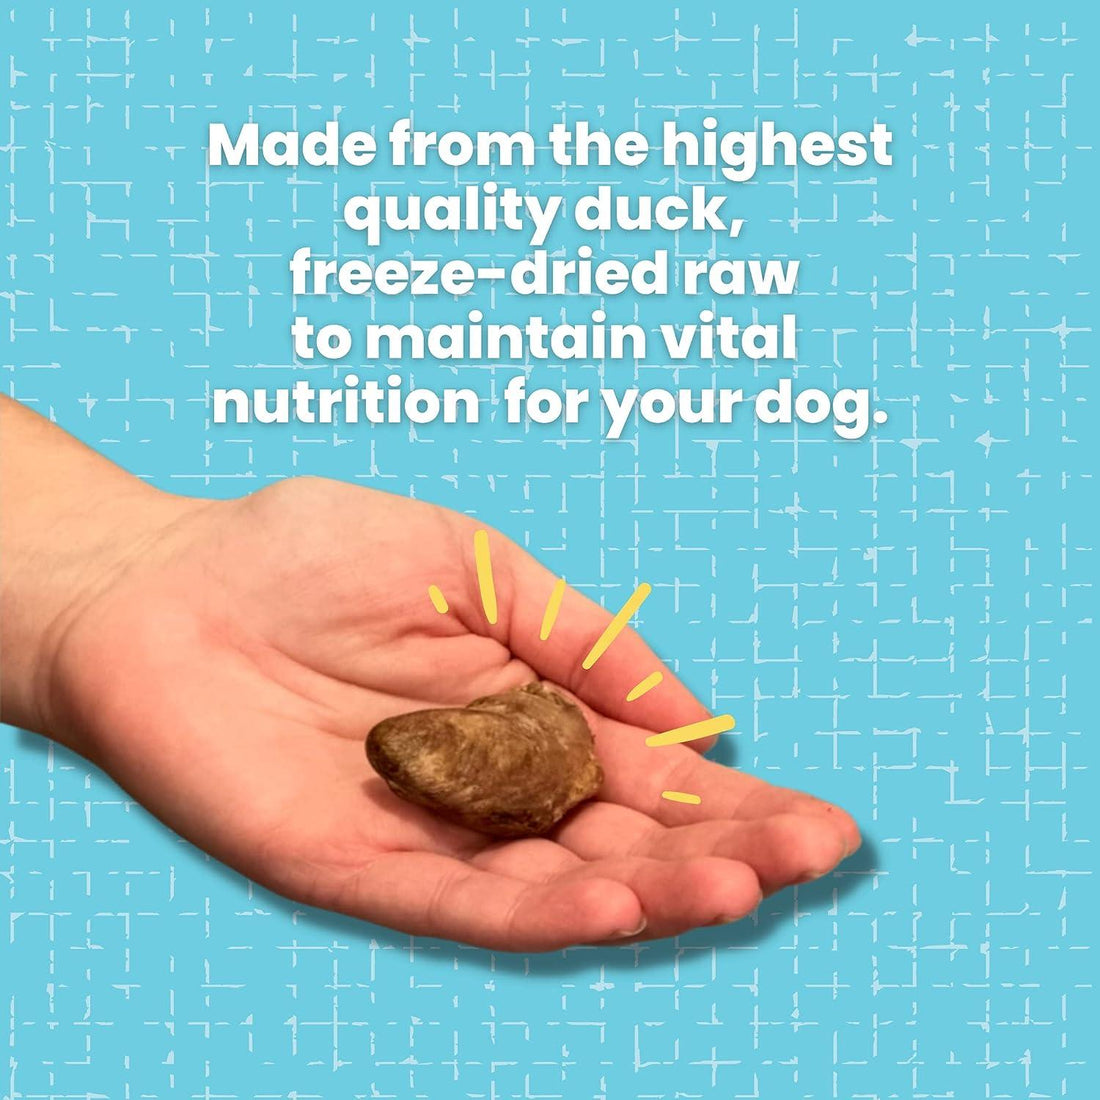 Freeze Dried Duck Hearts for Dogs & Cats | Freeze Dried Treats at HotSpot Pets